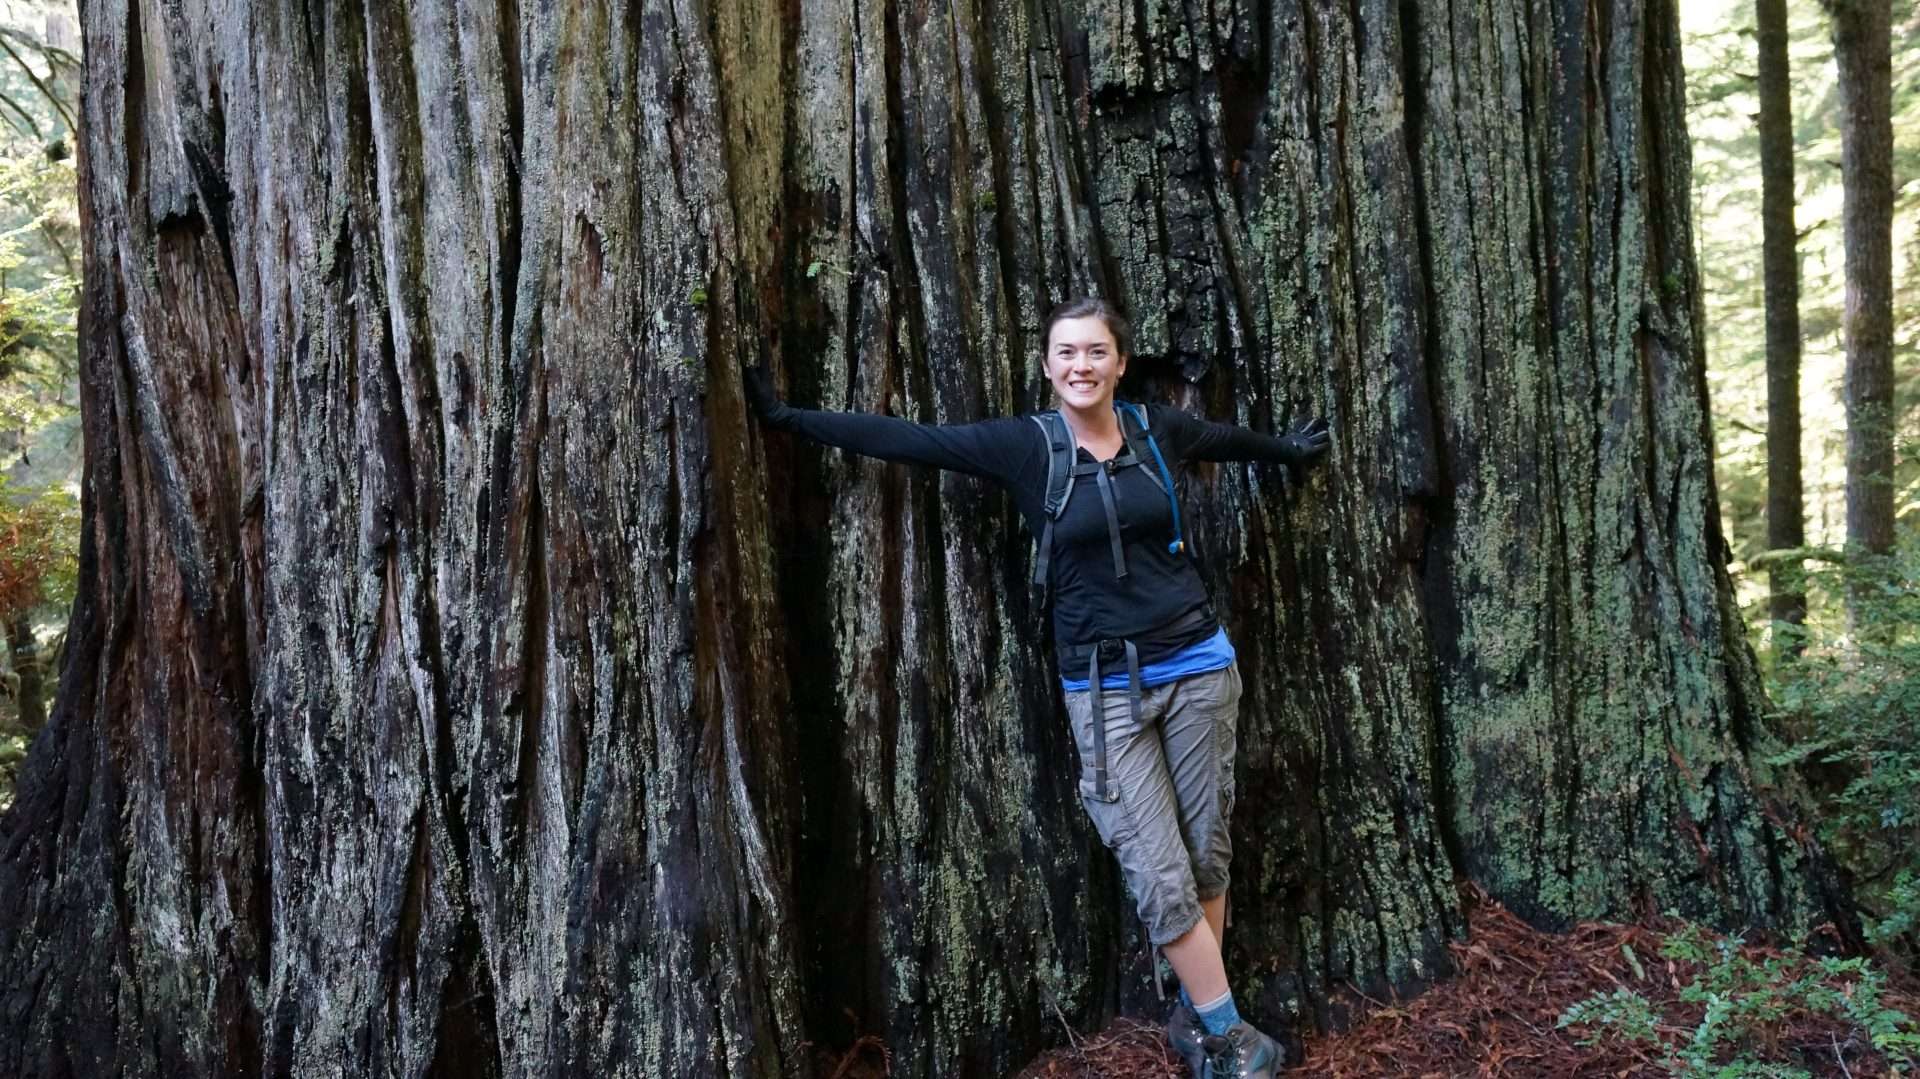 Cait in front of a giant redwood tree